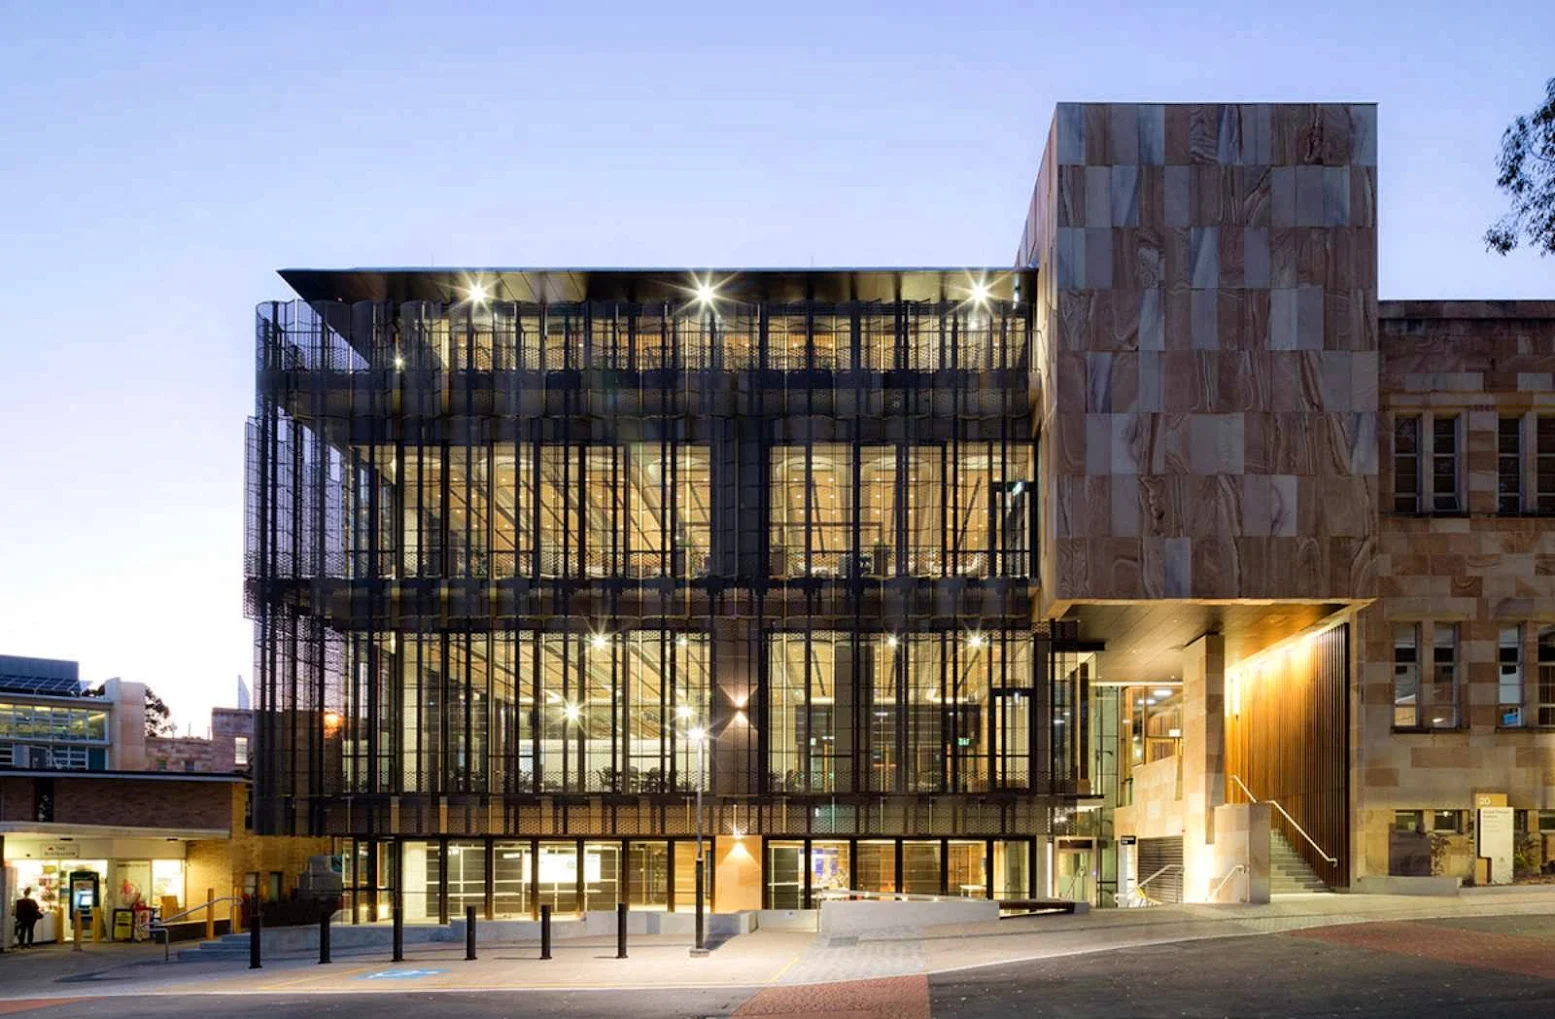 University of Queensland Global Change Institute by HASSELL